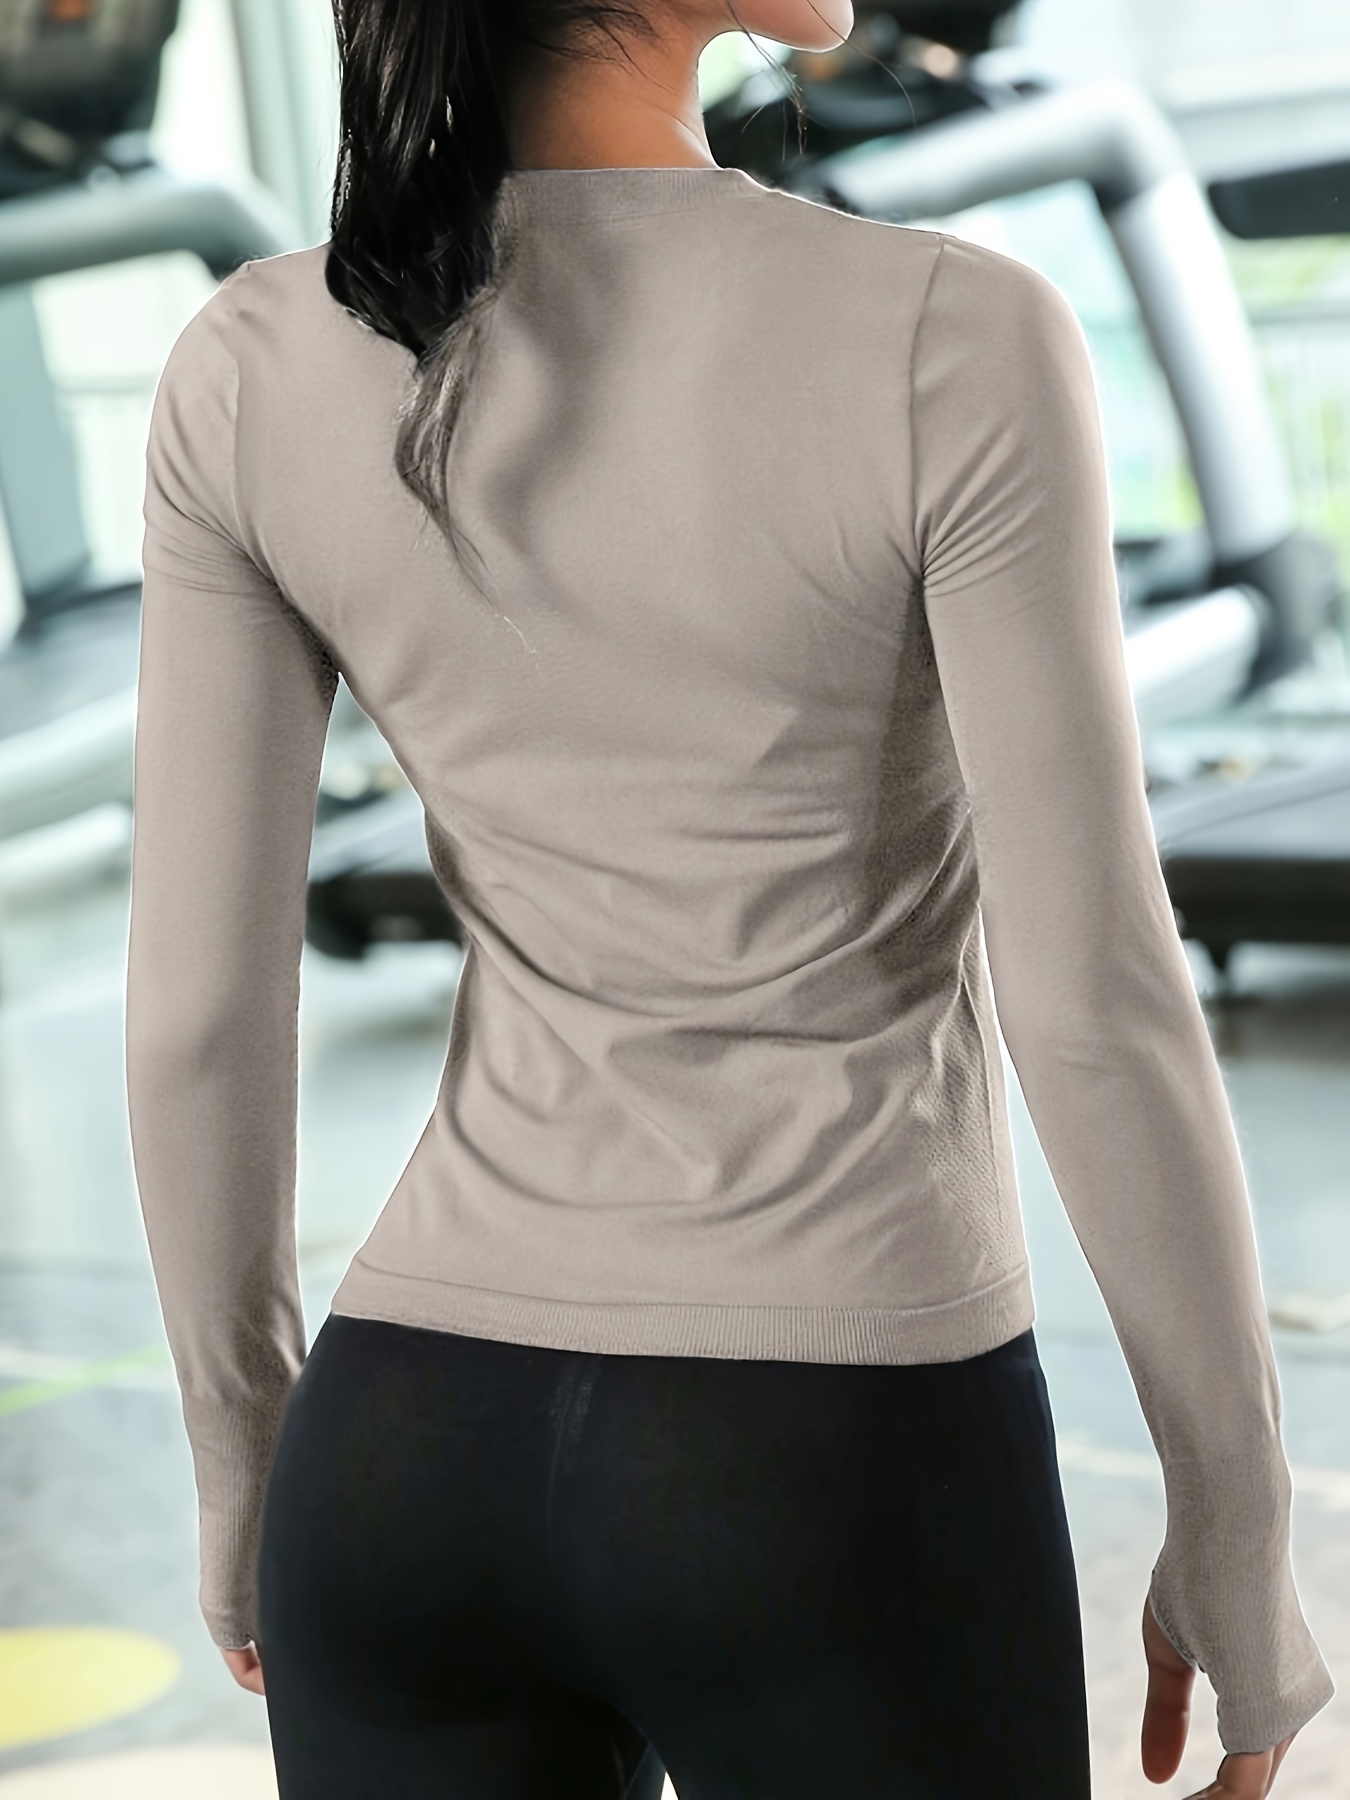 Women Compression Shirt Stretchy Short Sleeve Tight Fitting Athletic  Workout Running Yoga T-Shirt 